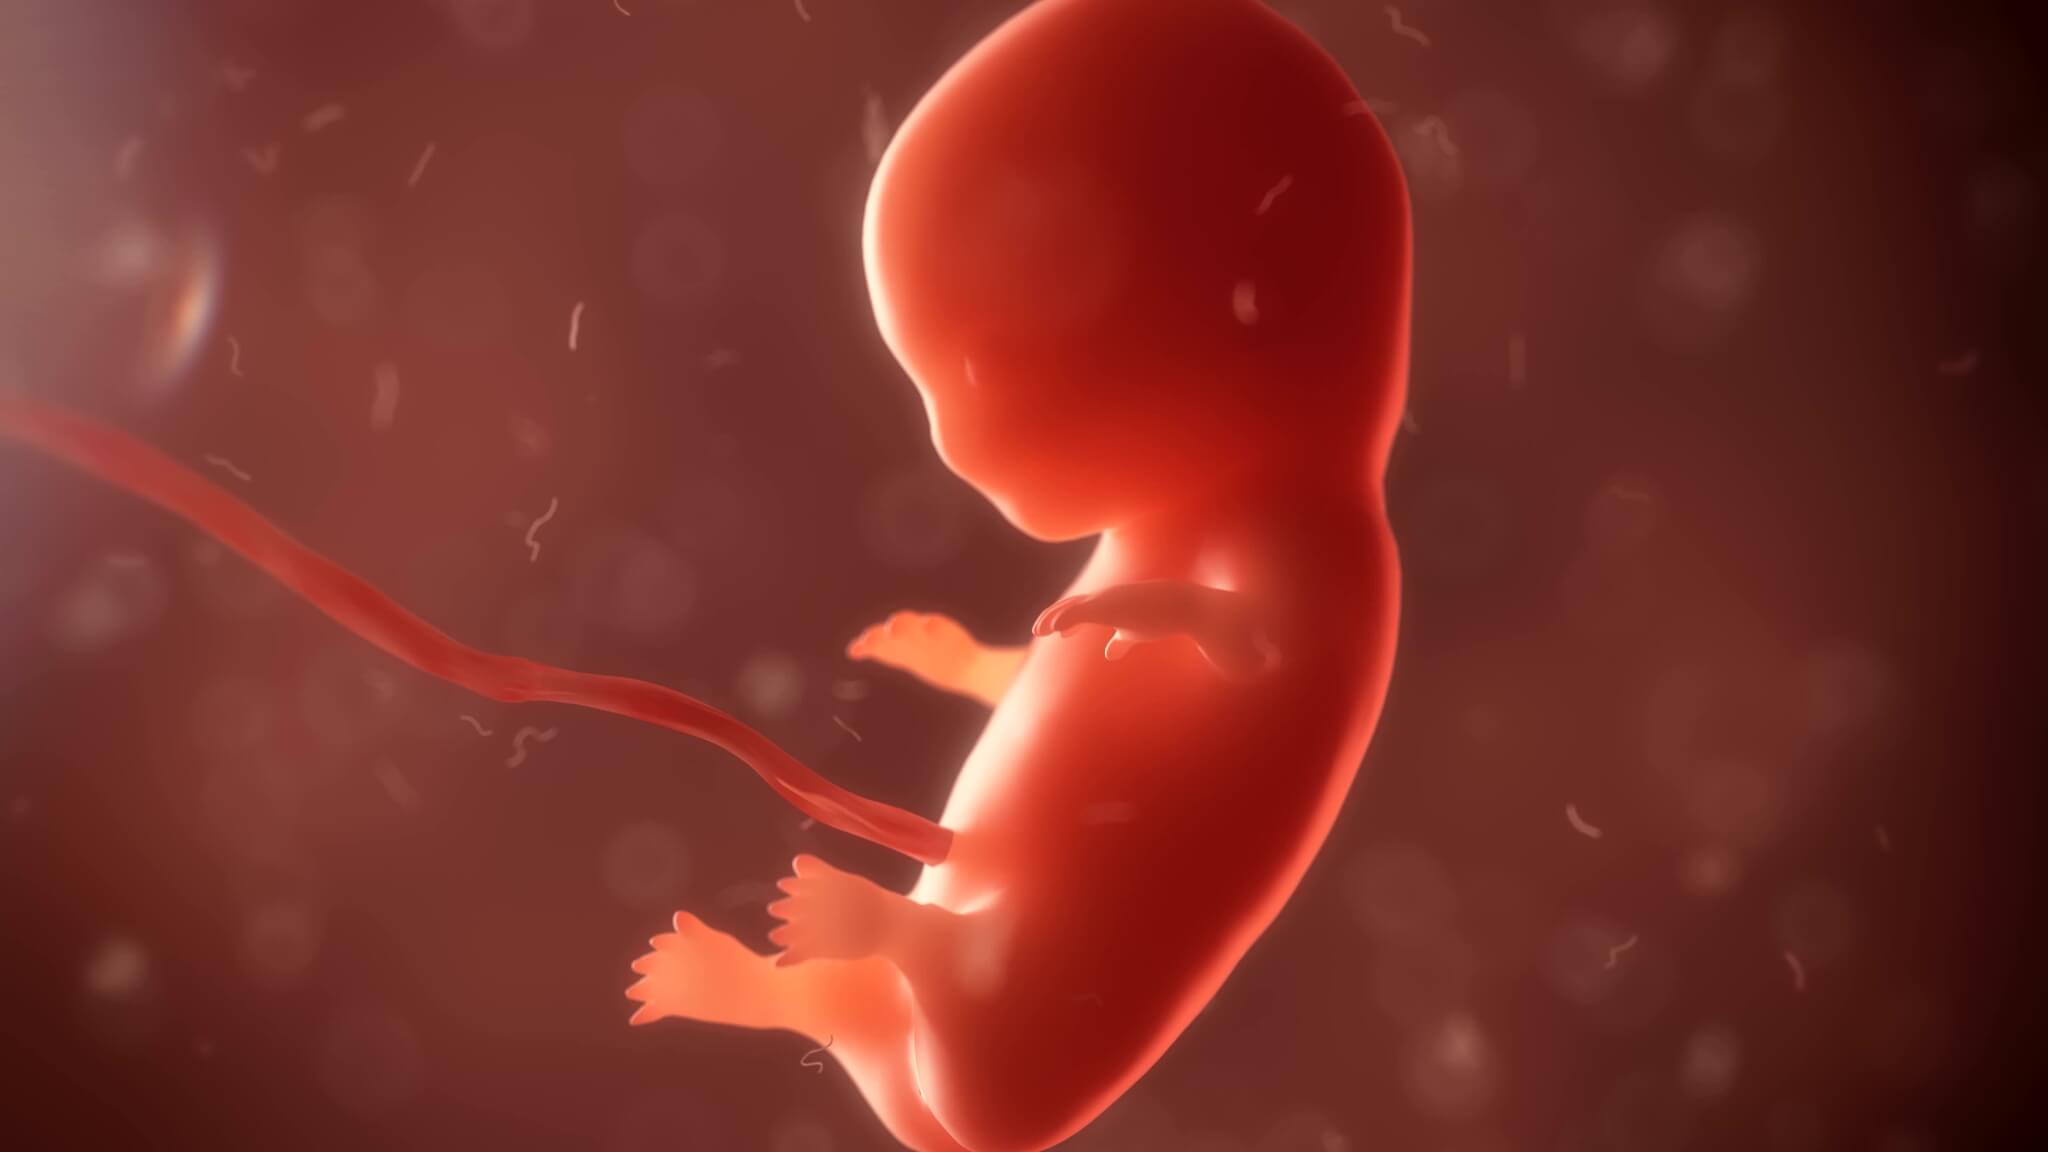 Embryo phase of baby in womb